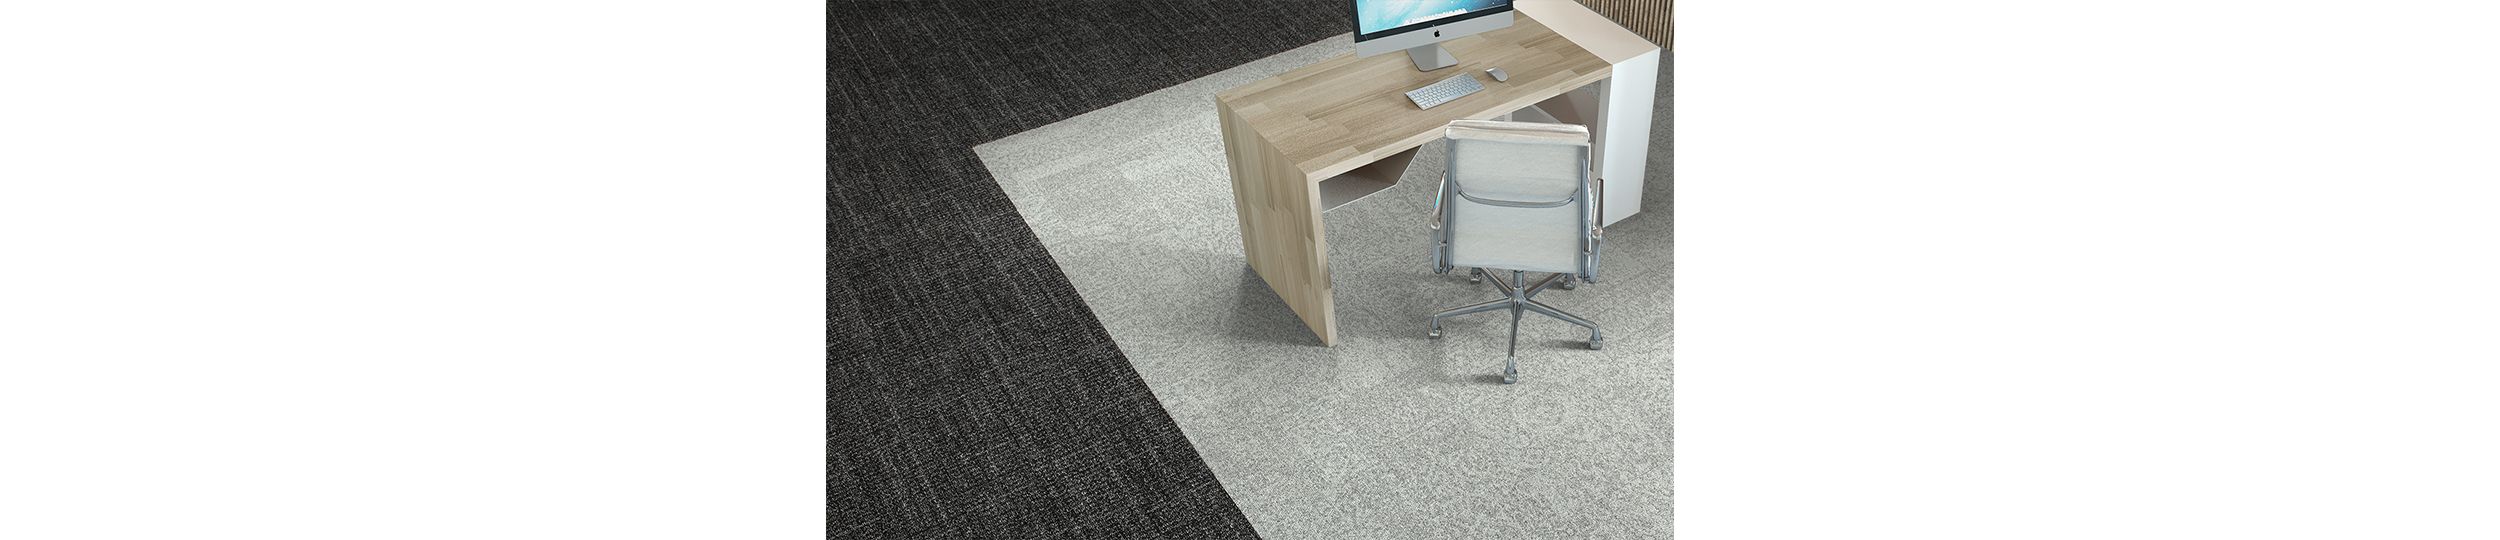 Interface Open Air 405 carpet tile in overhead view with small wooden workstation image number 5